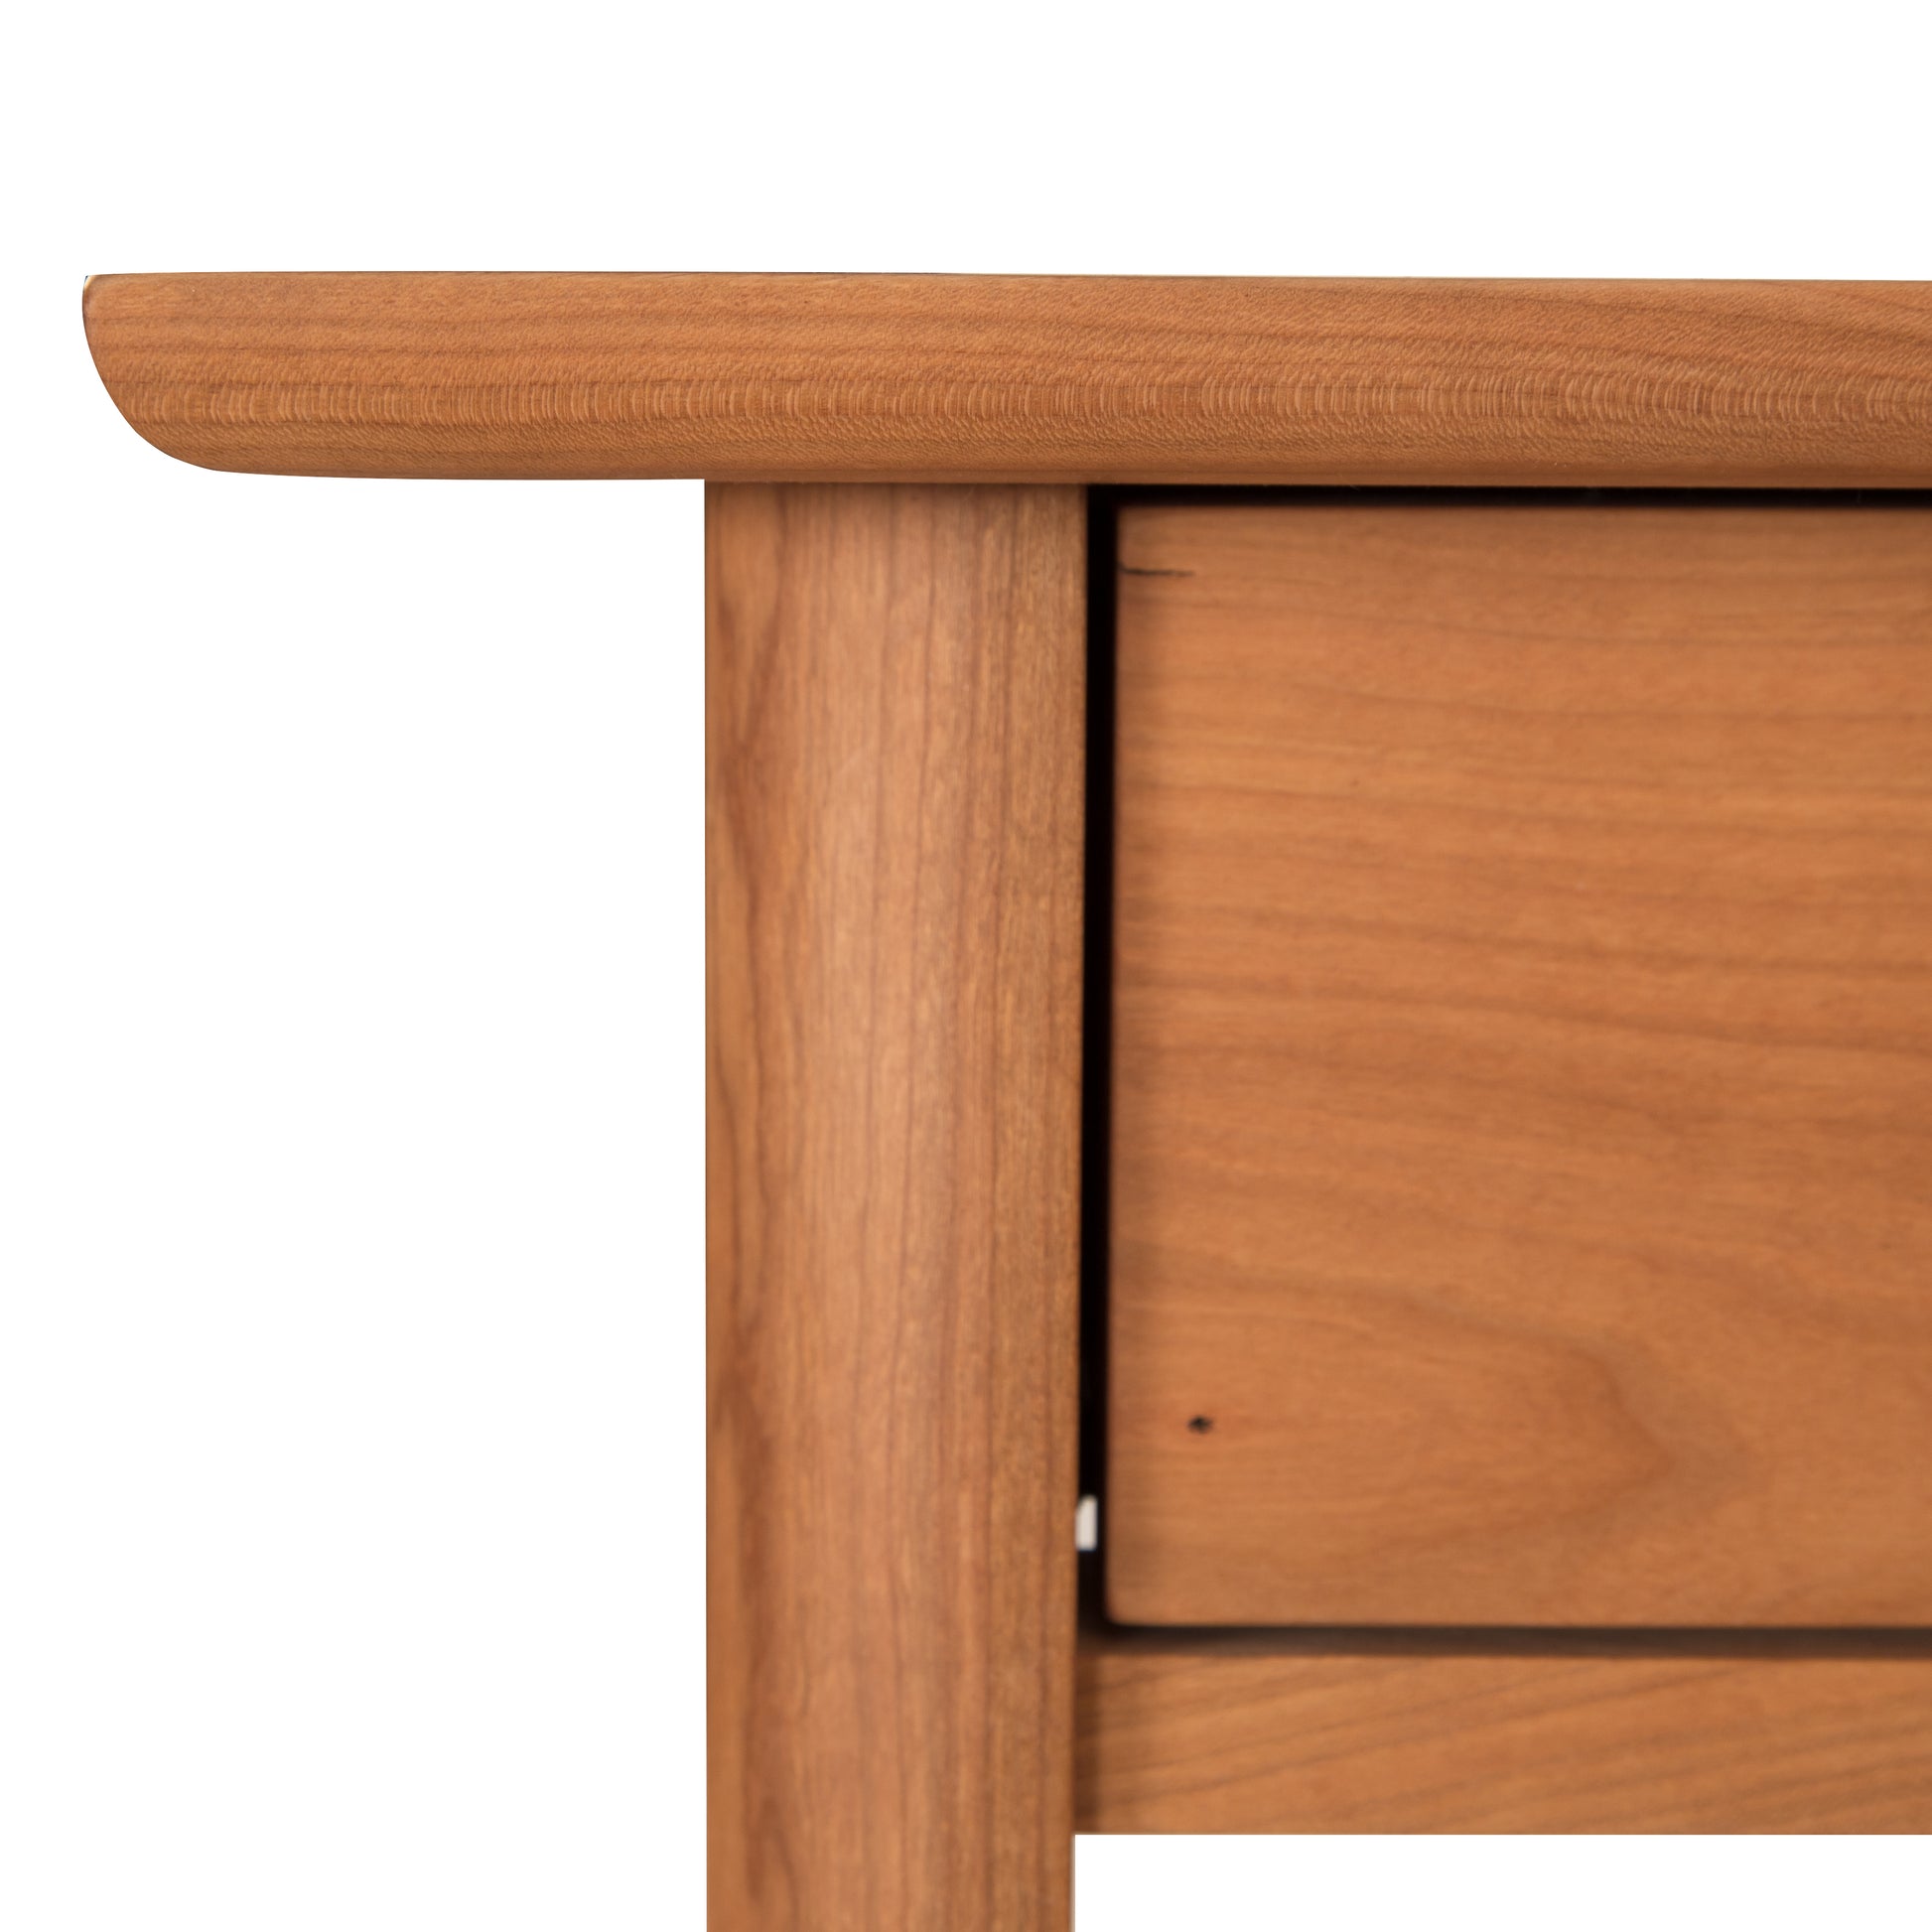 A close up of a wooden table with a drawer.